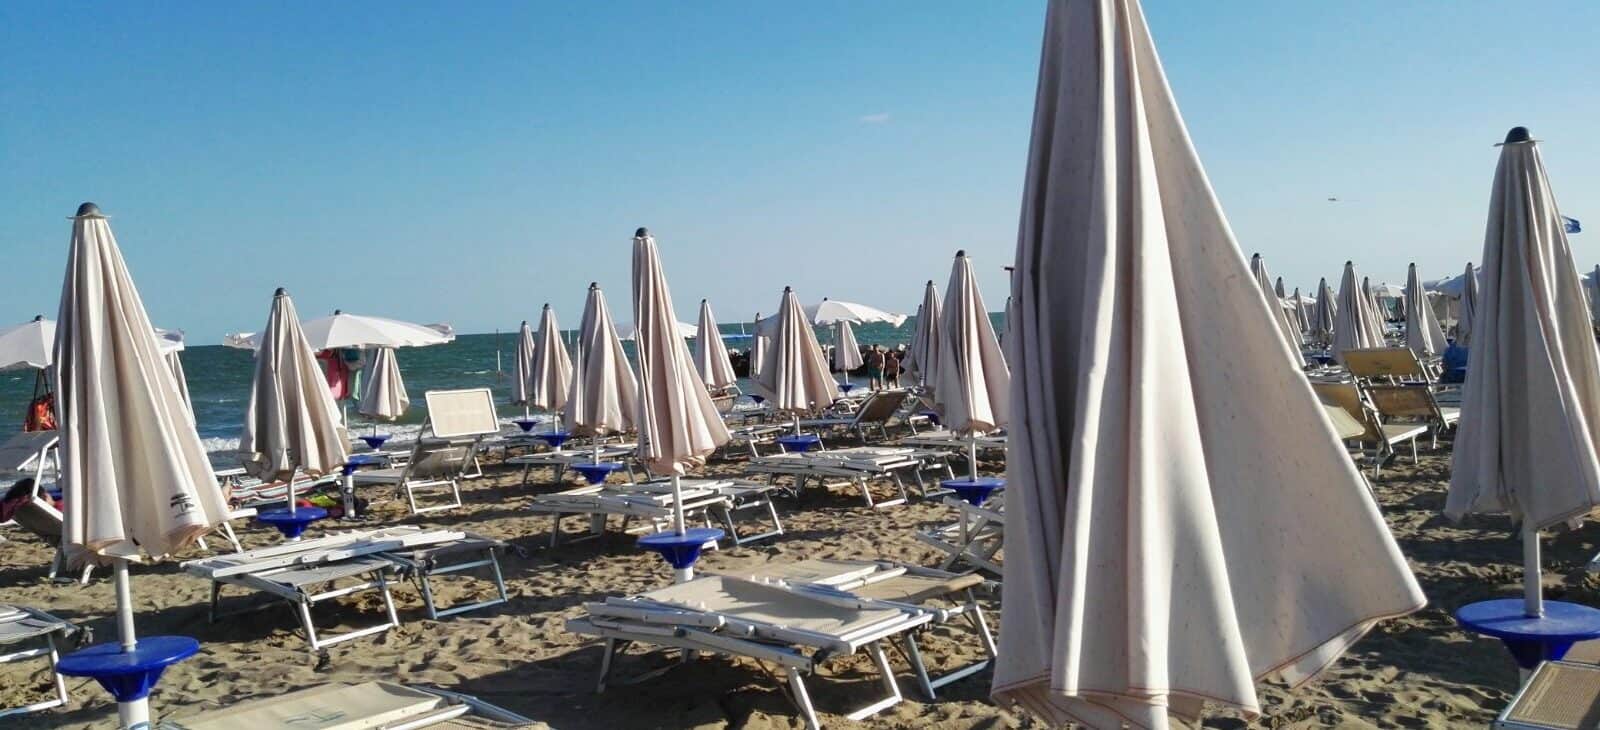 Hotel Angelo-hotel 3 stelle caorle-SITO UFFICIALE